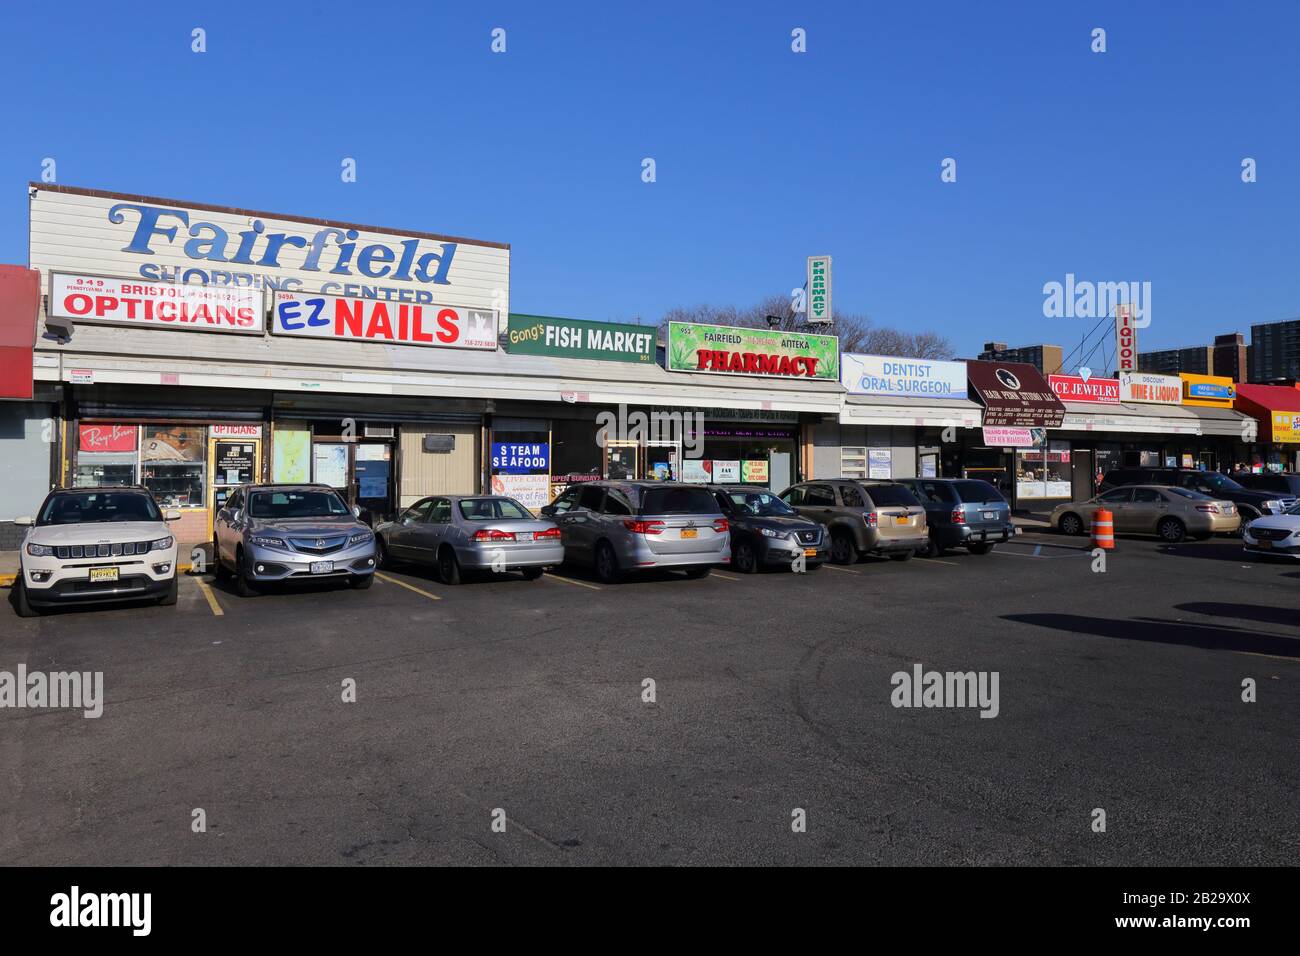 Fairfield Shopping Center, Brooklyn, New York. NYC storefront photo of a strip mall shopping center containing very few chain stores in East New York Stock Photo